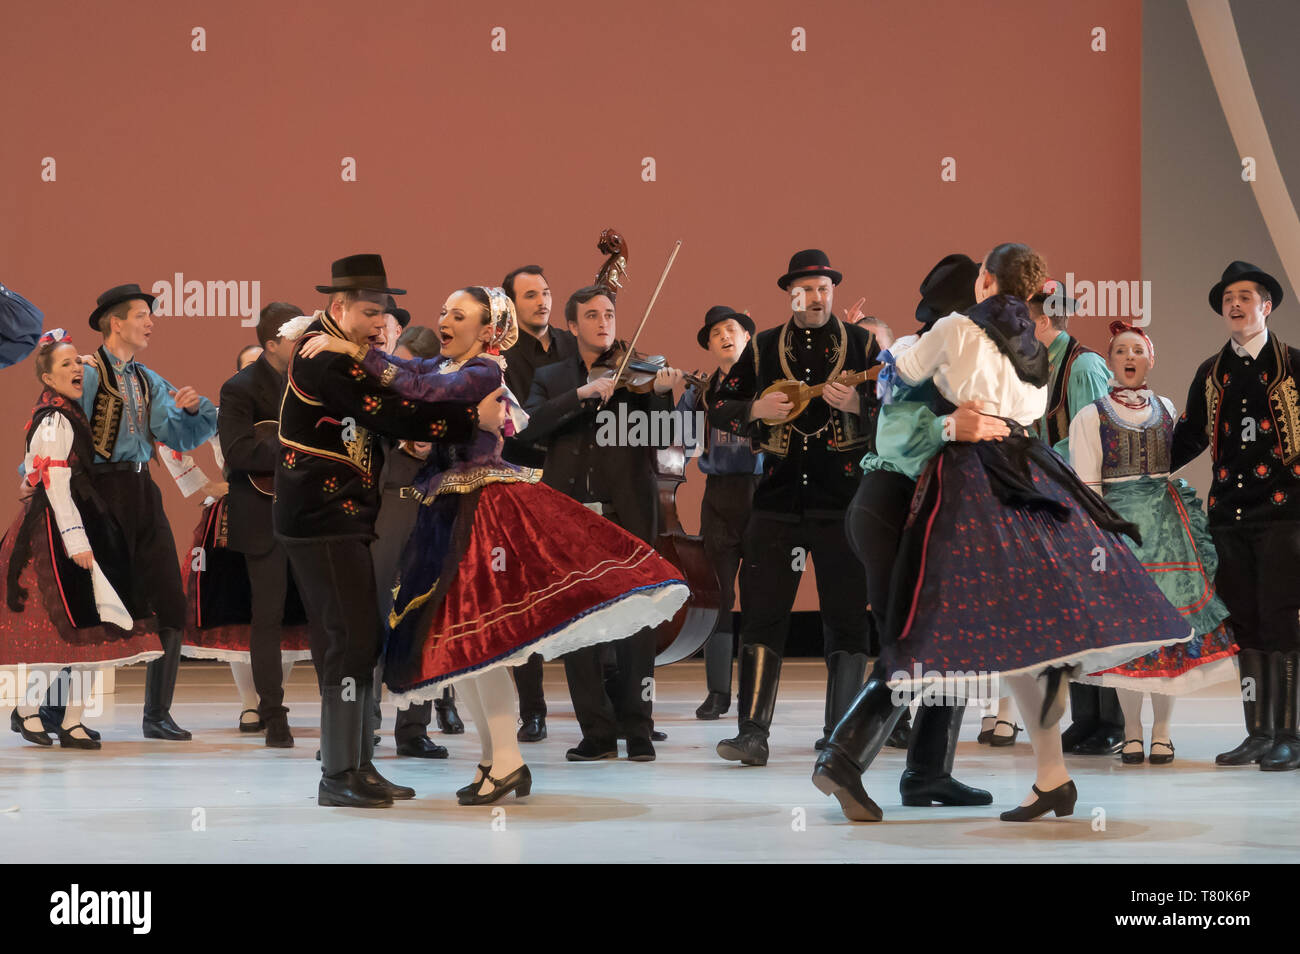 (190510) -- BUDAPEST, May 10, 2019 (Xinhua) -- Members of the Hungarian State Folk Ensemble perform during a dress rehearsal of their new production 'The Thousand Faces of the Southern Land' in Budapest, Hungary, May 9, 2019. (Xinhua/Attila Volgyi) Stock Photo